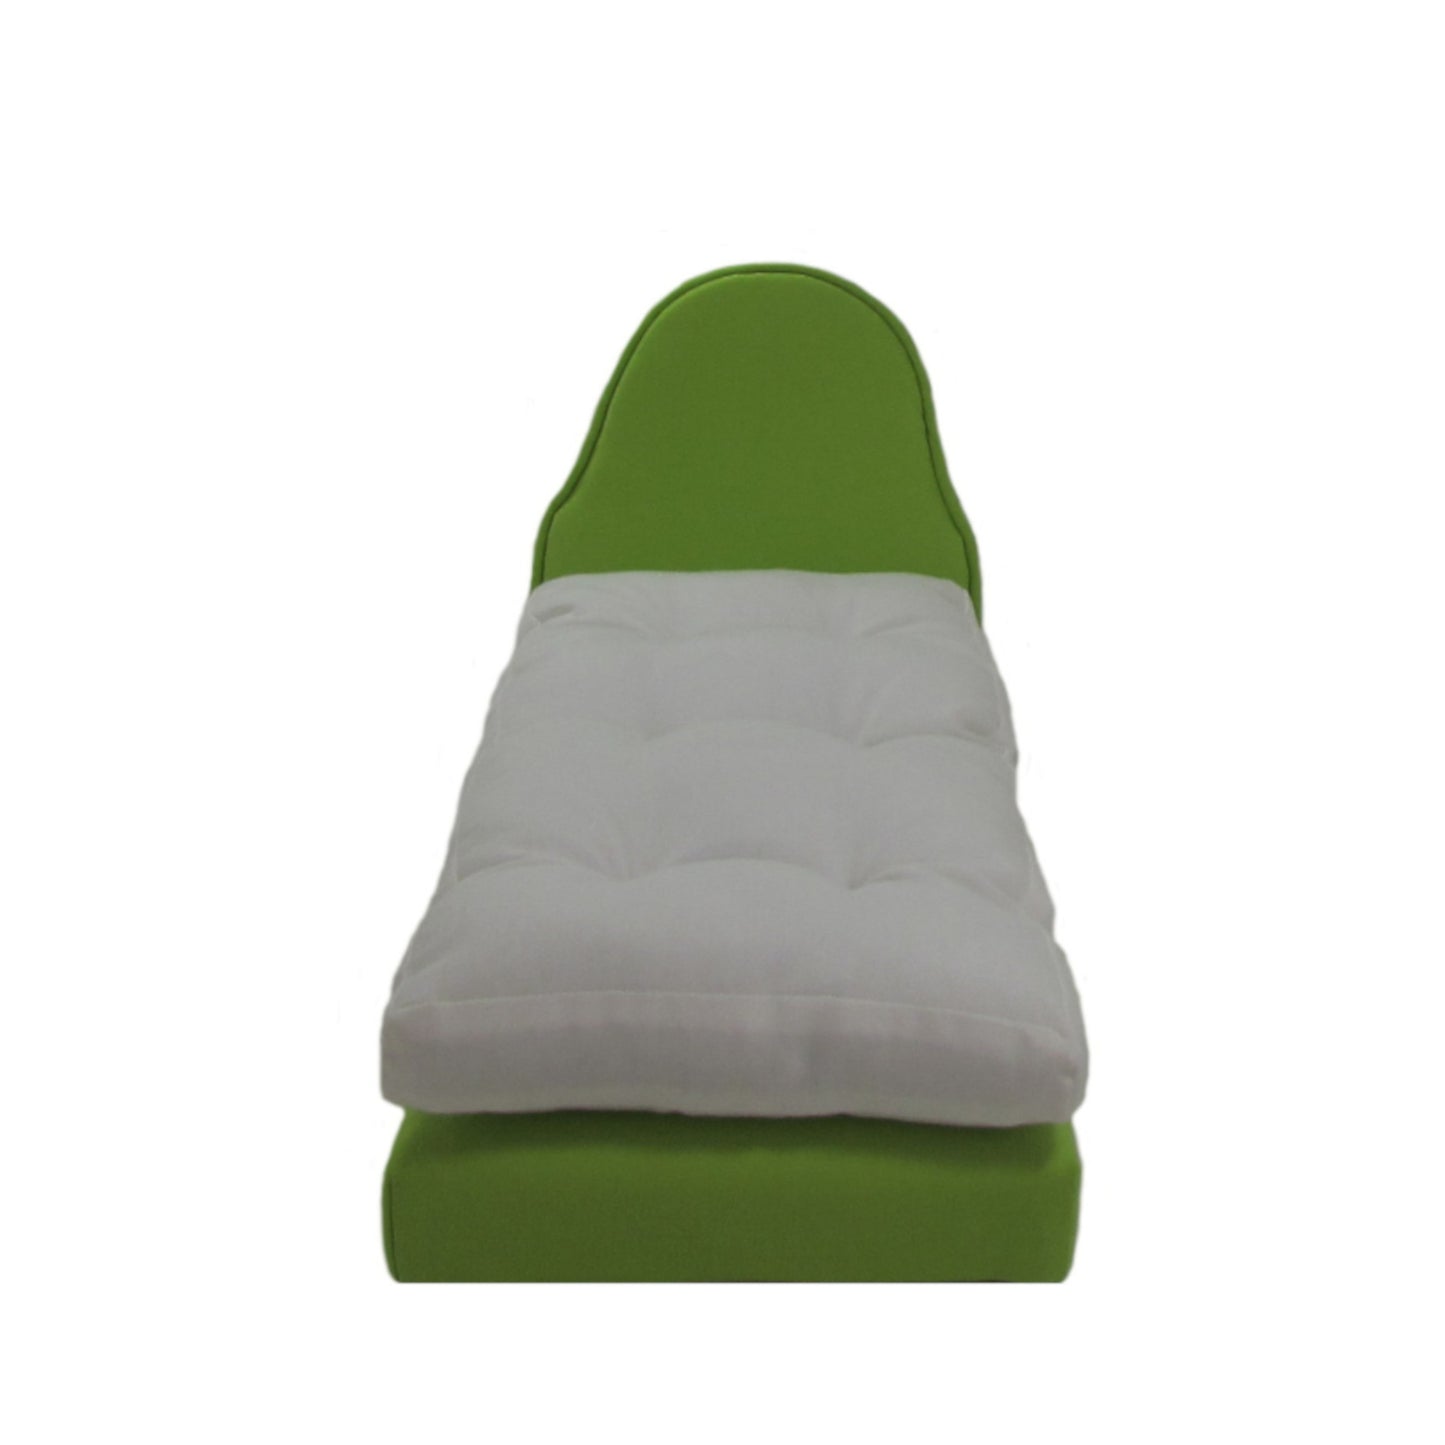 Upholstered Light Green Doll Bed for 11 1/2-inch and 12-inch dolls Second view for multiple beds